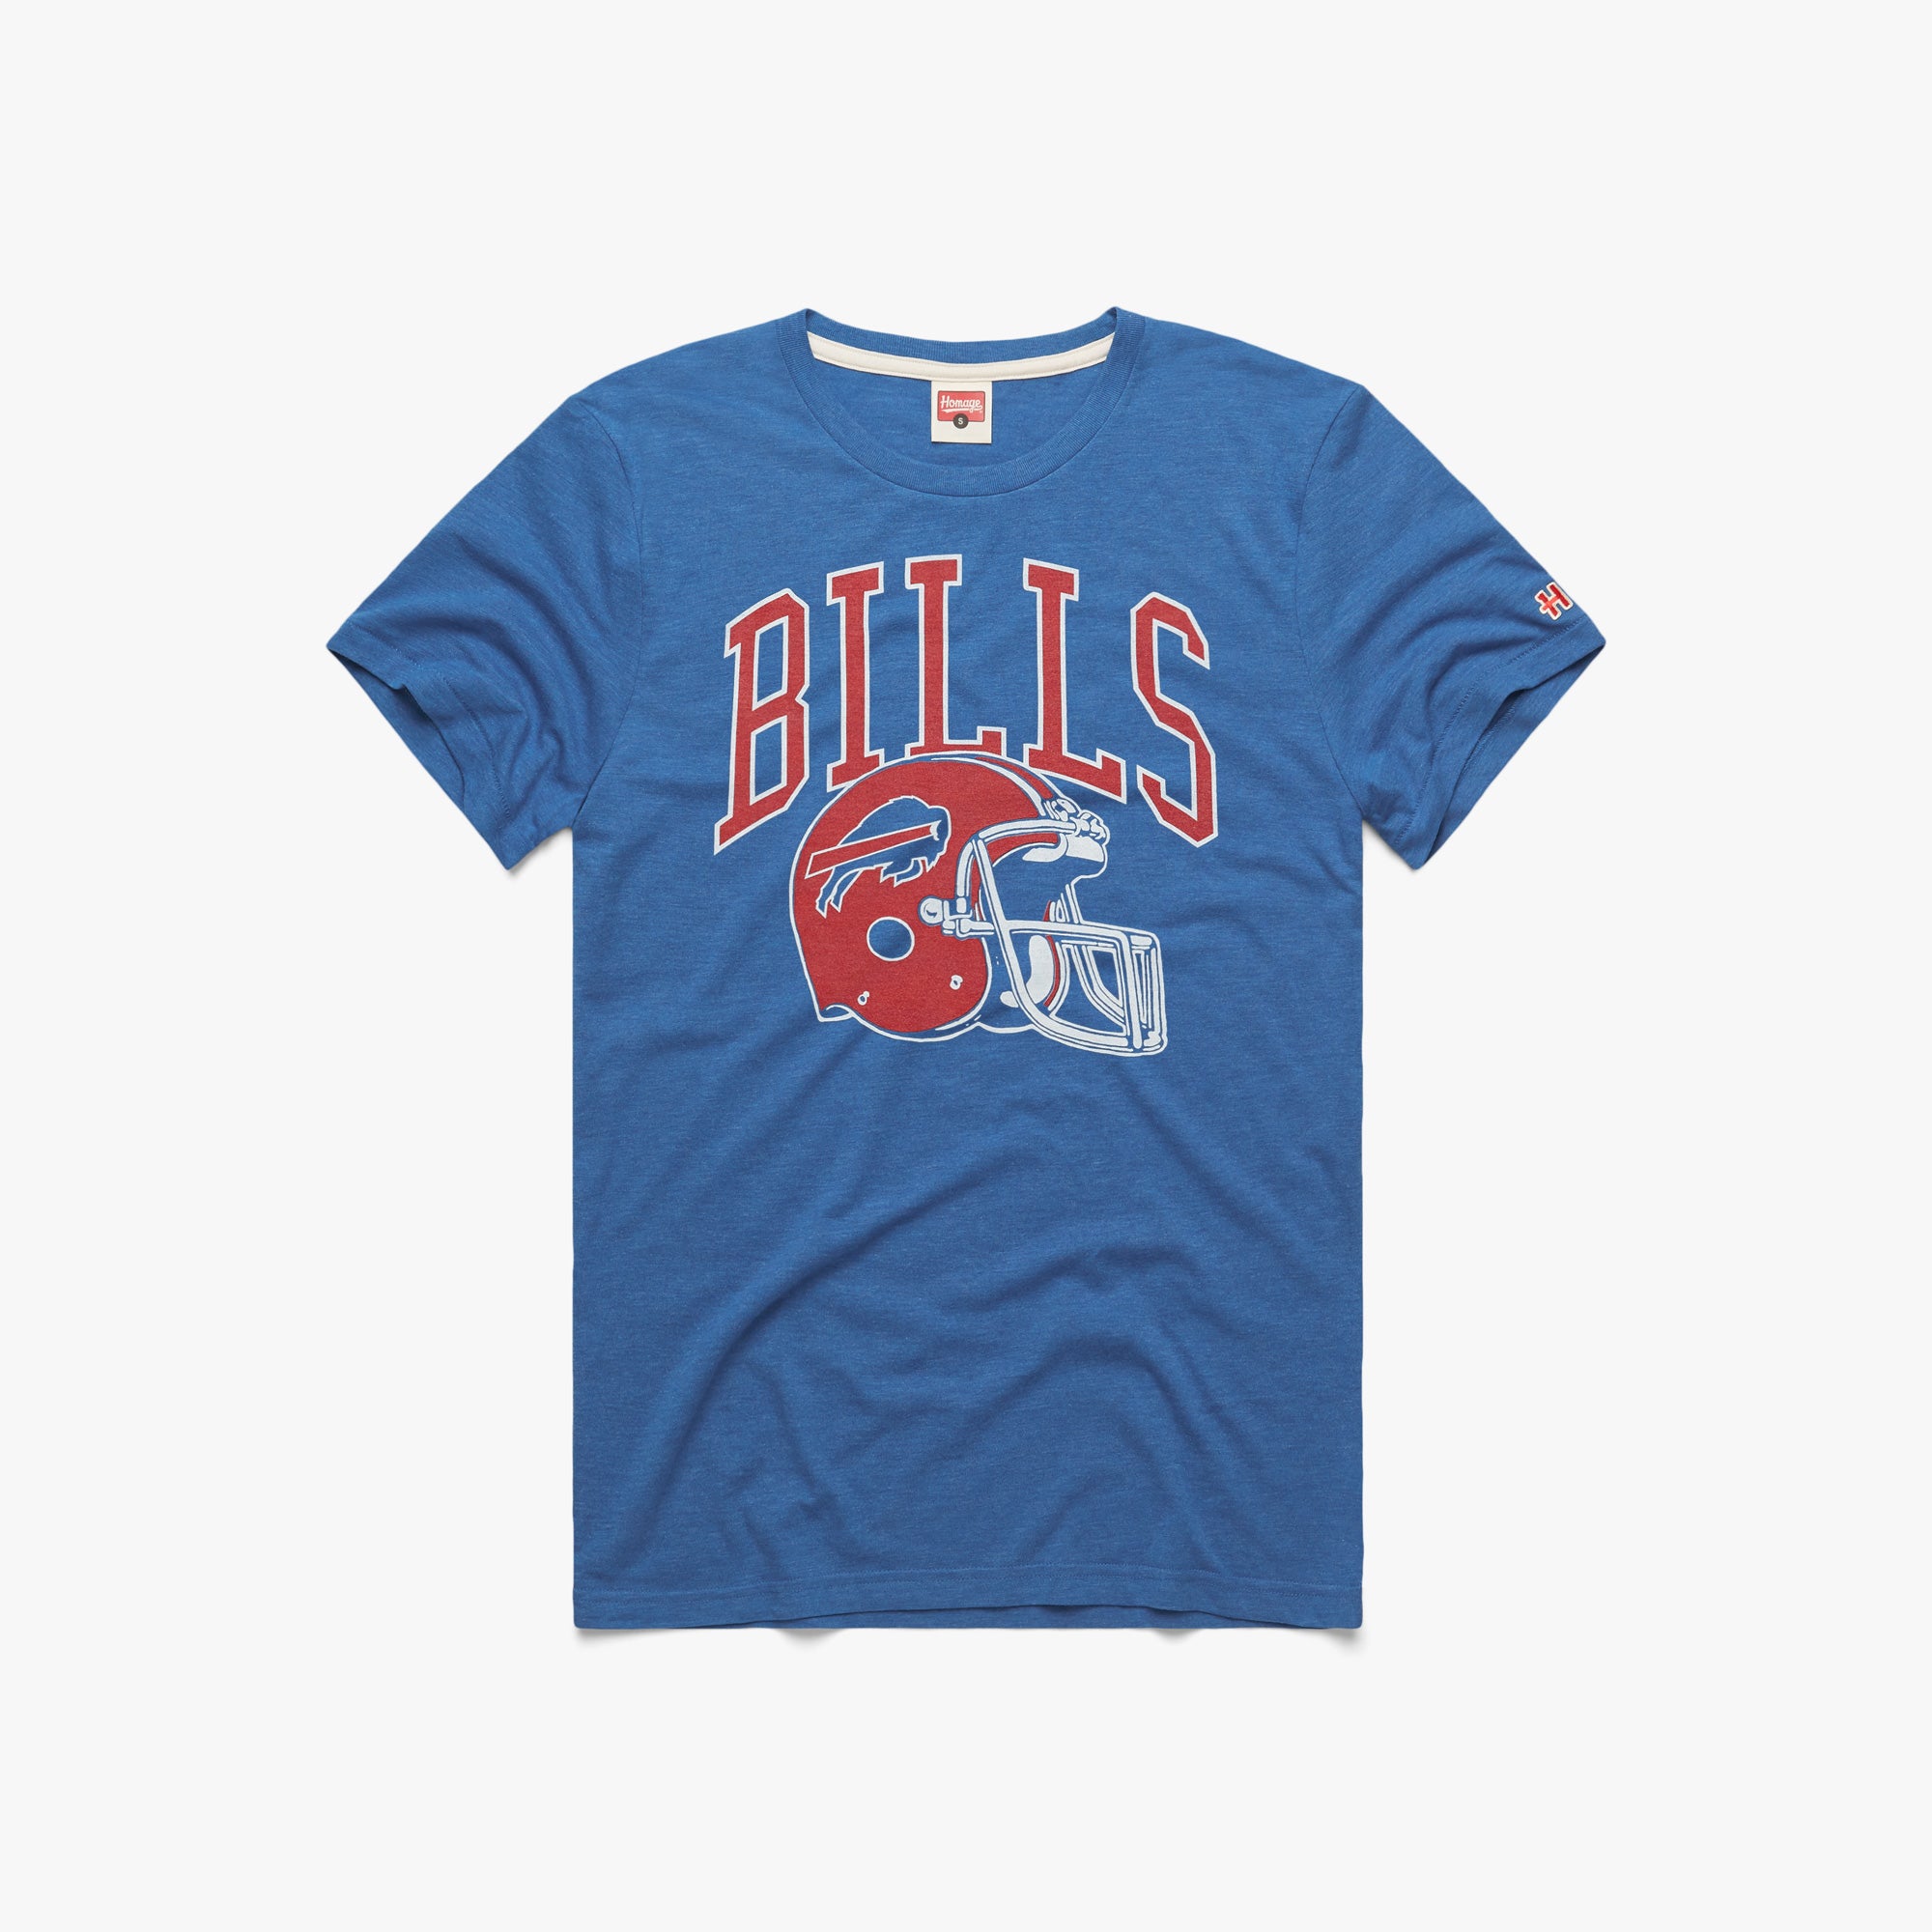 Buffalo Bills Helmet Retro T-Shirt from Homage. | Officially Licensed Vintage NFL Apparel from Homage Pro Shop.